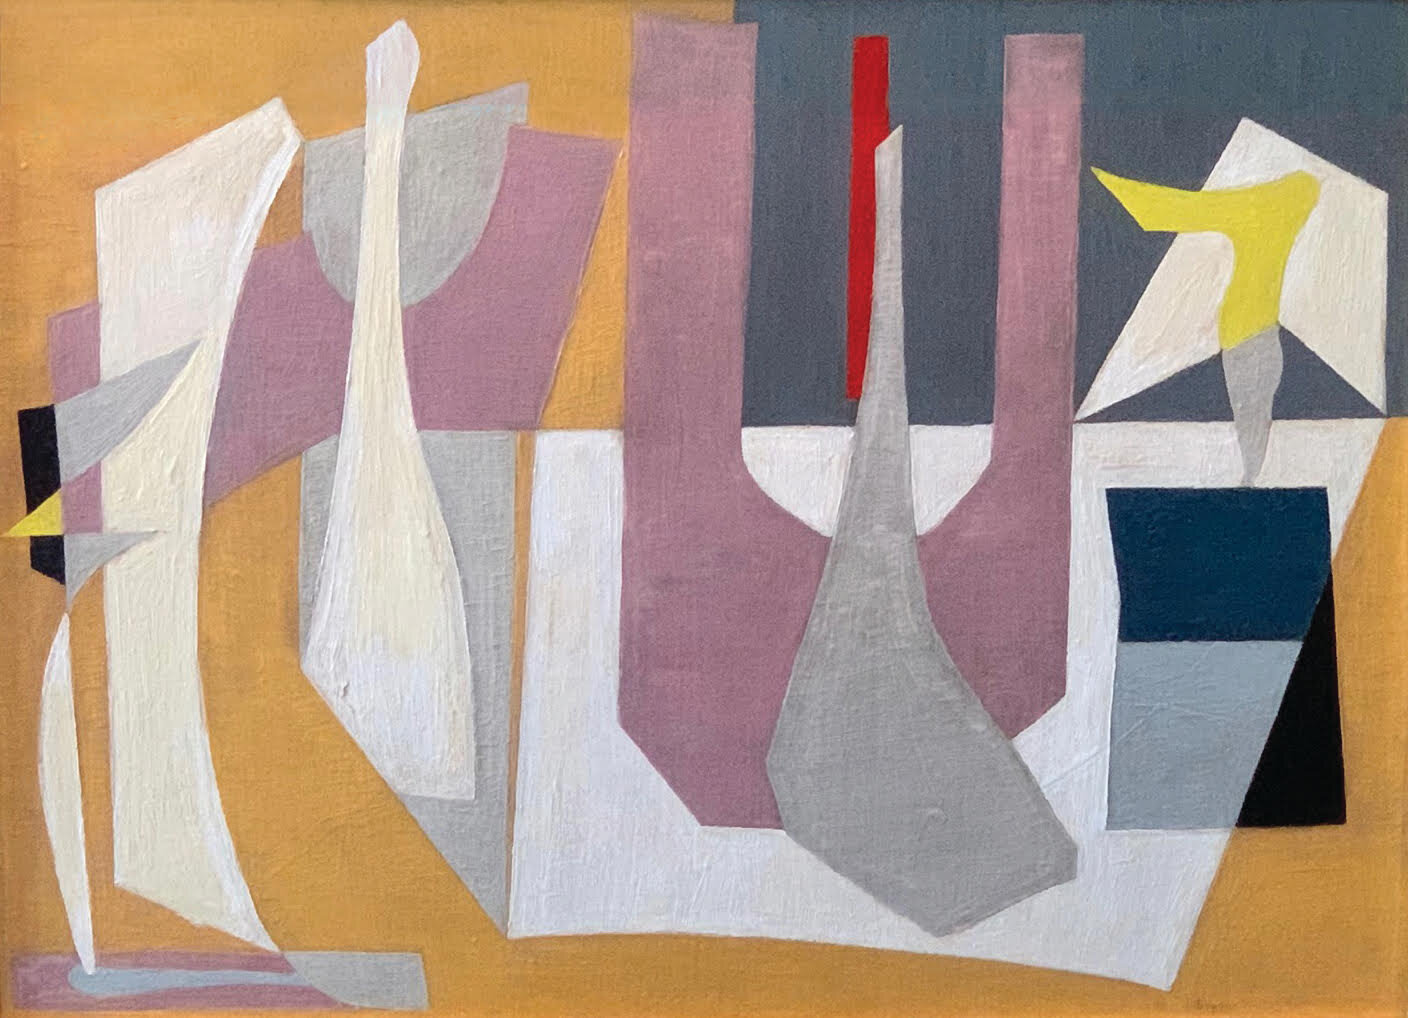 Painting of abstract shapes in yellow, white, grey, pink, red, and black colors